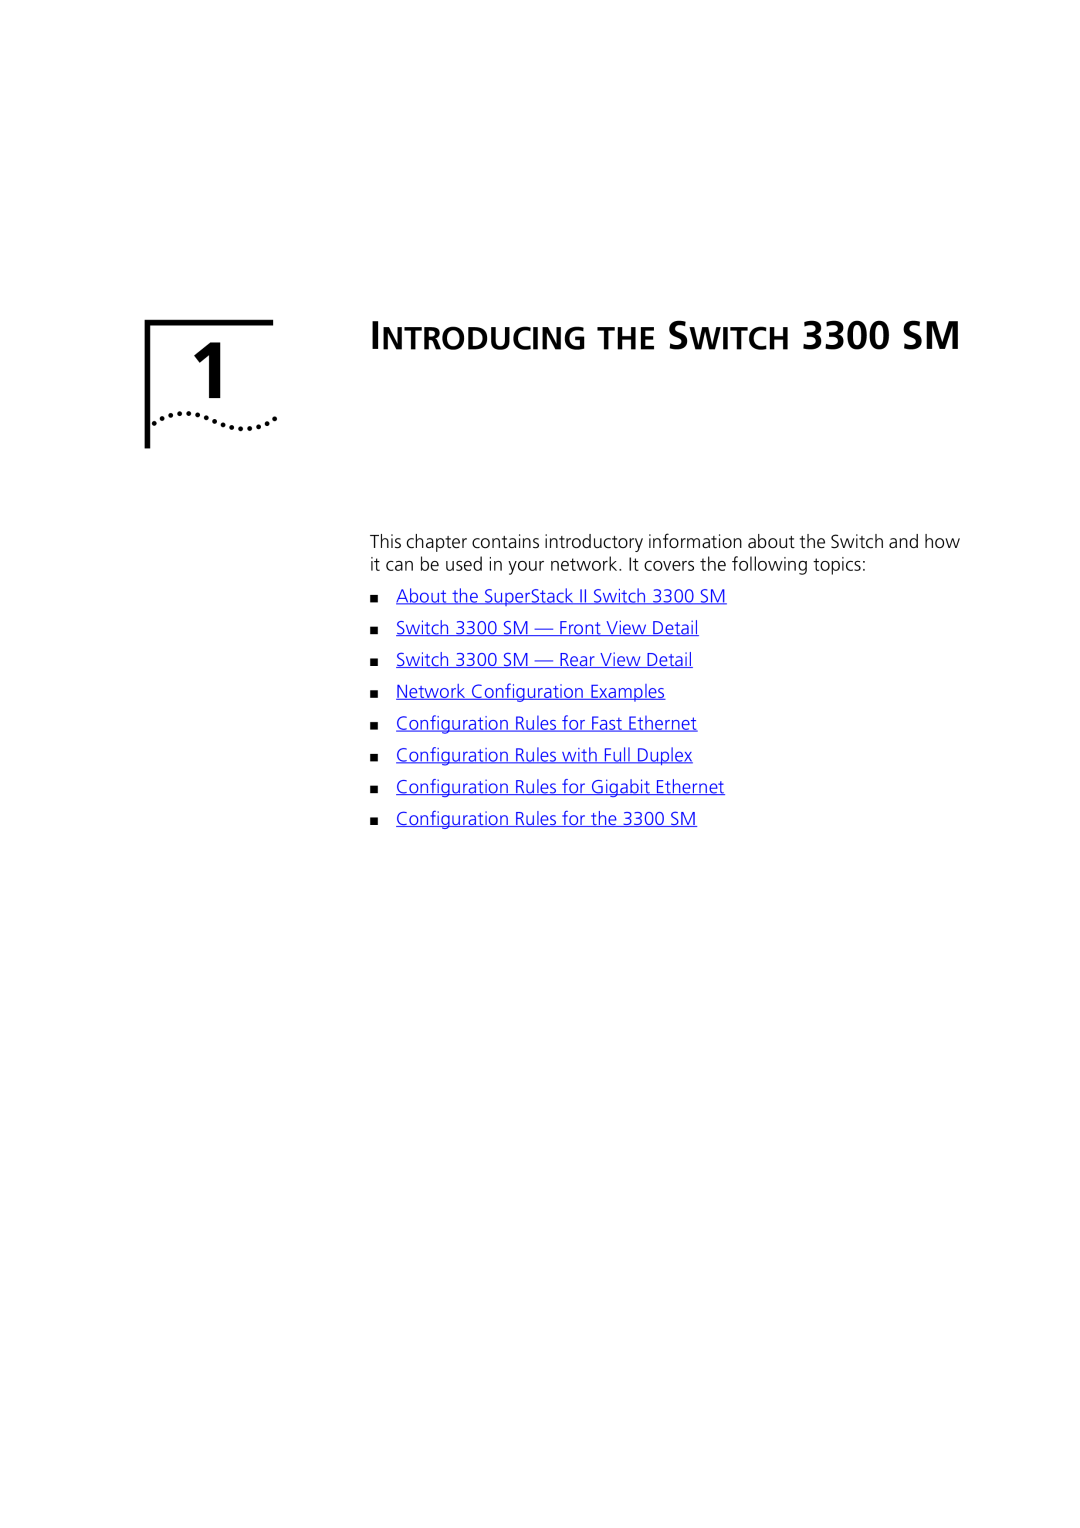 3Com 3C16987 manual INTRODUCING THE SWITCH 3300 SM 